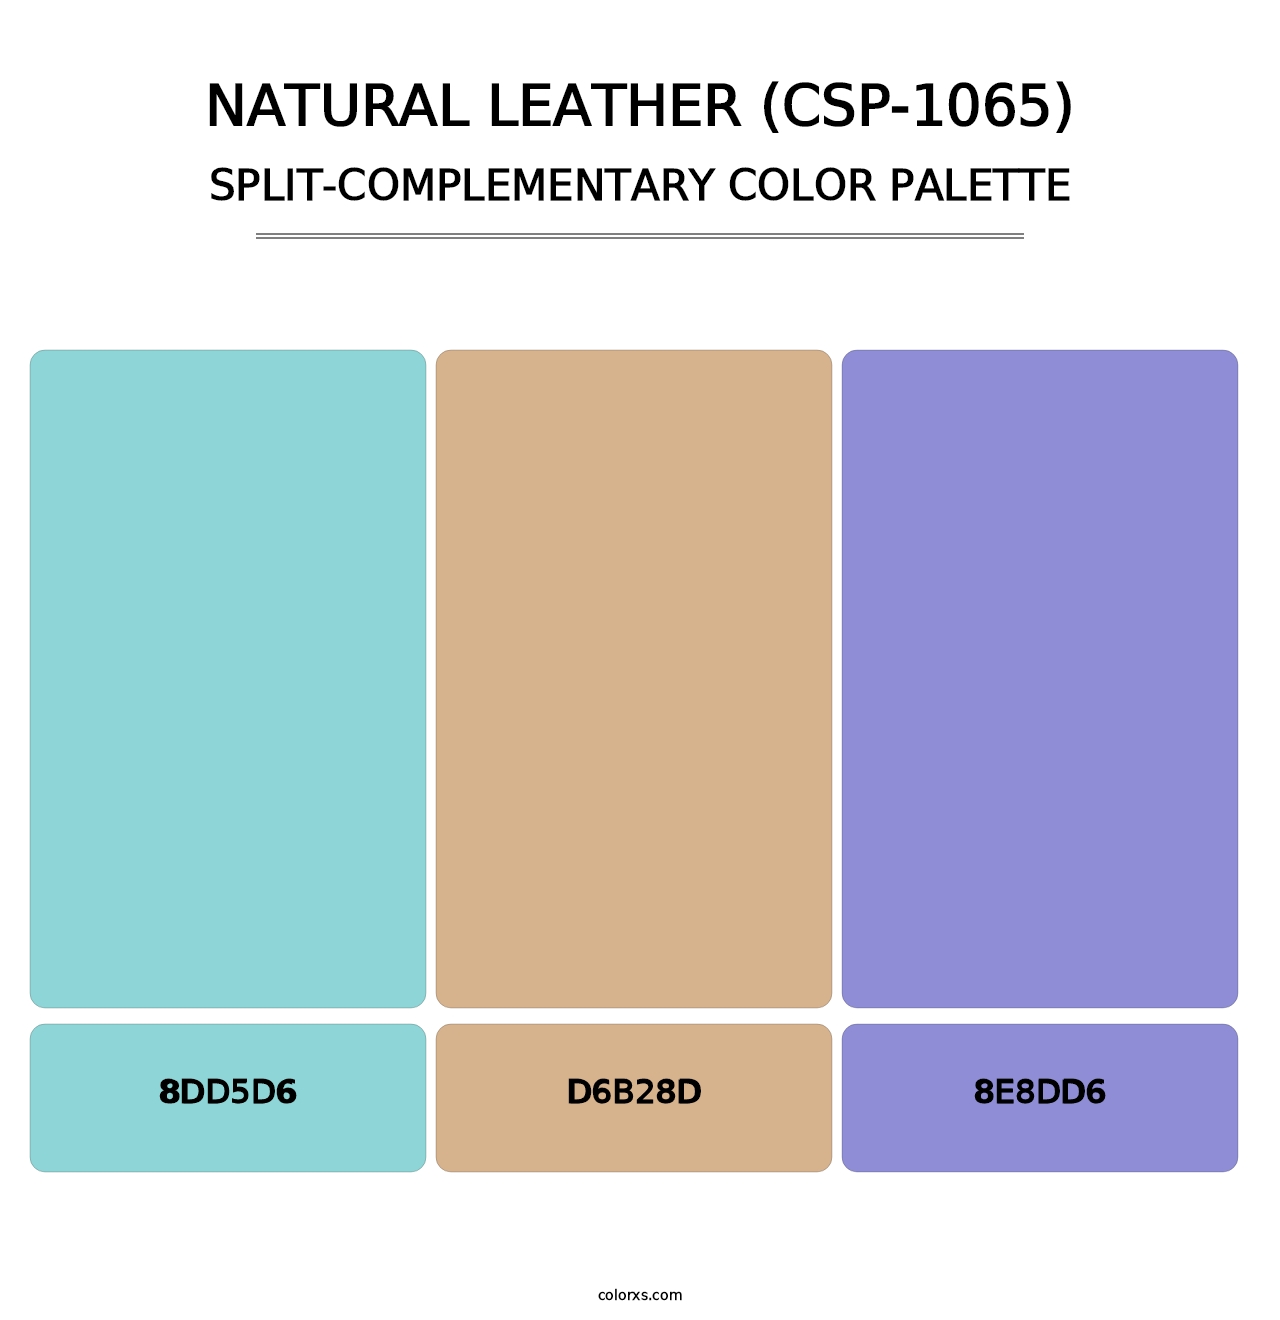 Natural Leather (CSP-1065) - Split-Complementary Color Palette